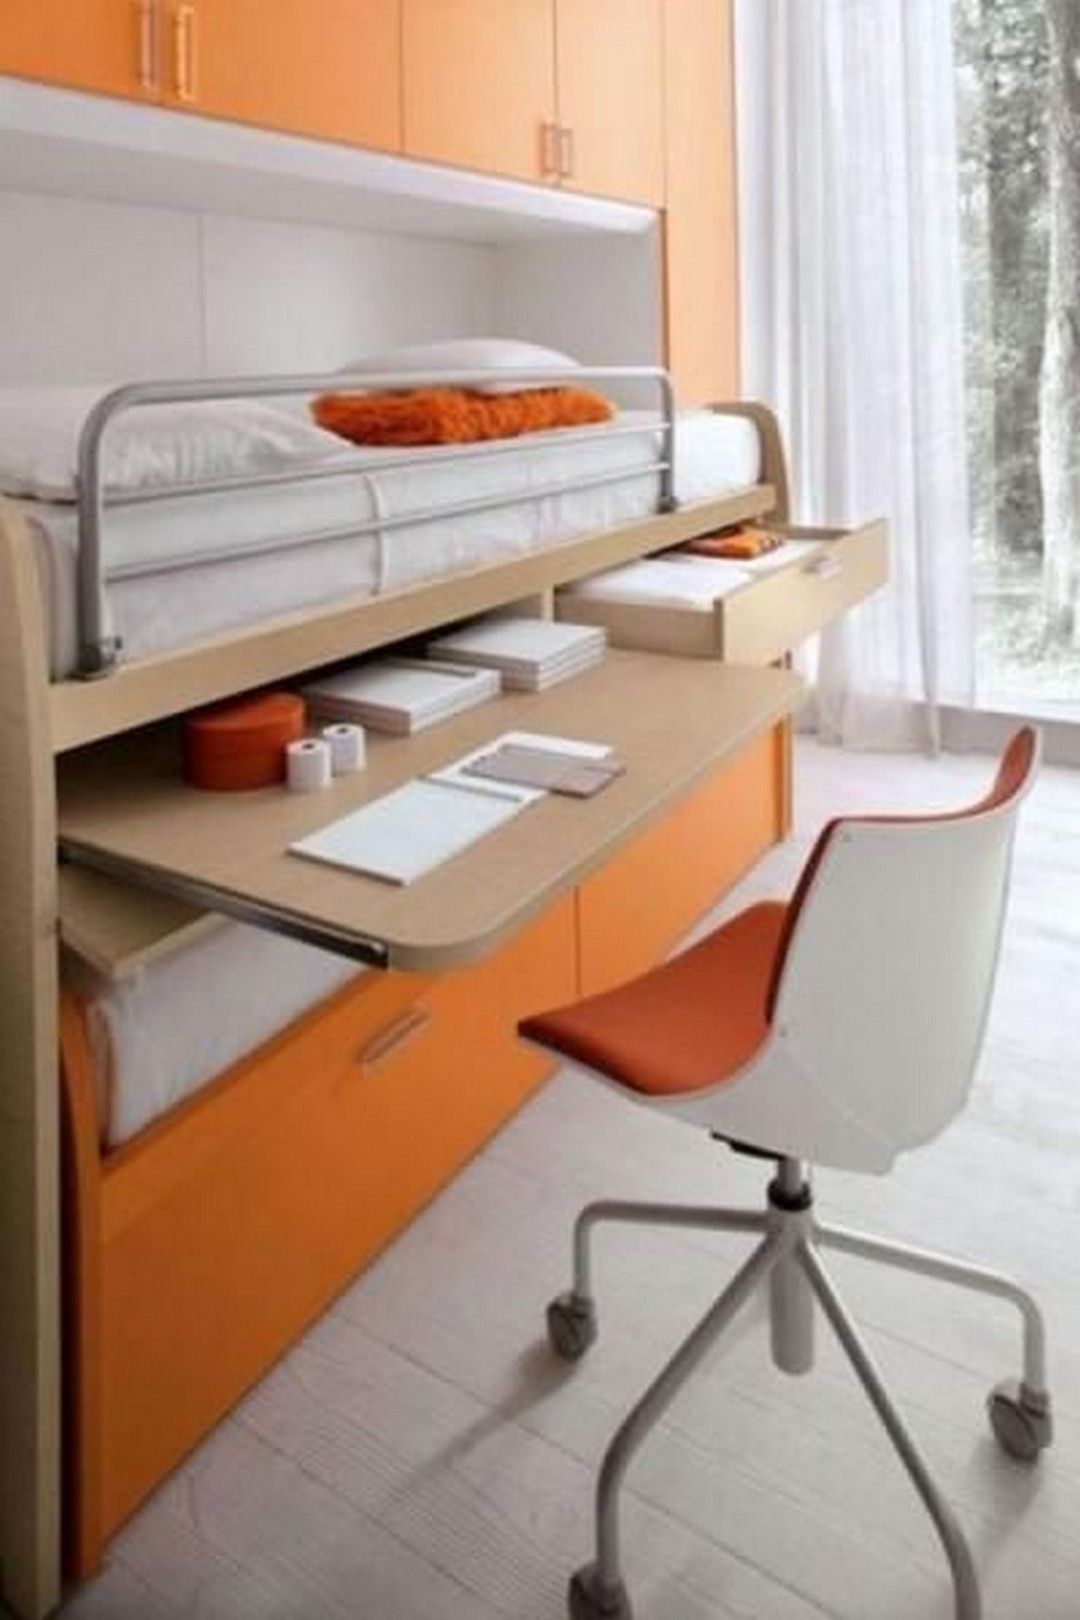 Space Saving Furniture Ideas For Small Apartments